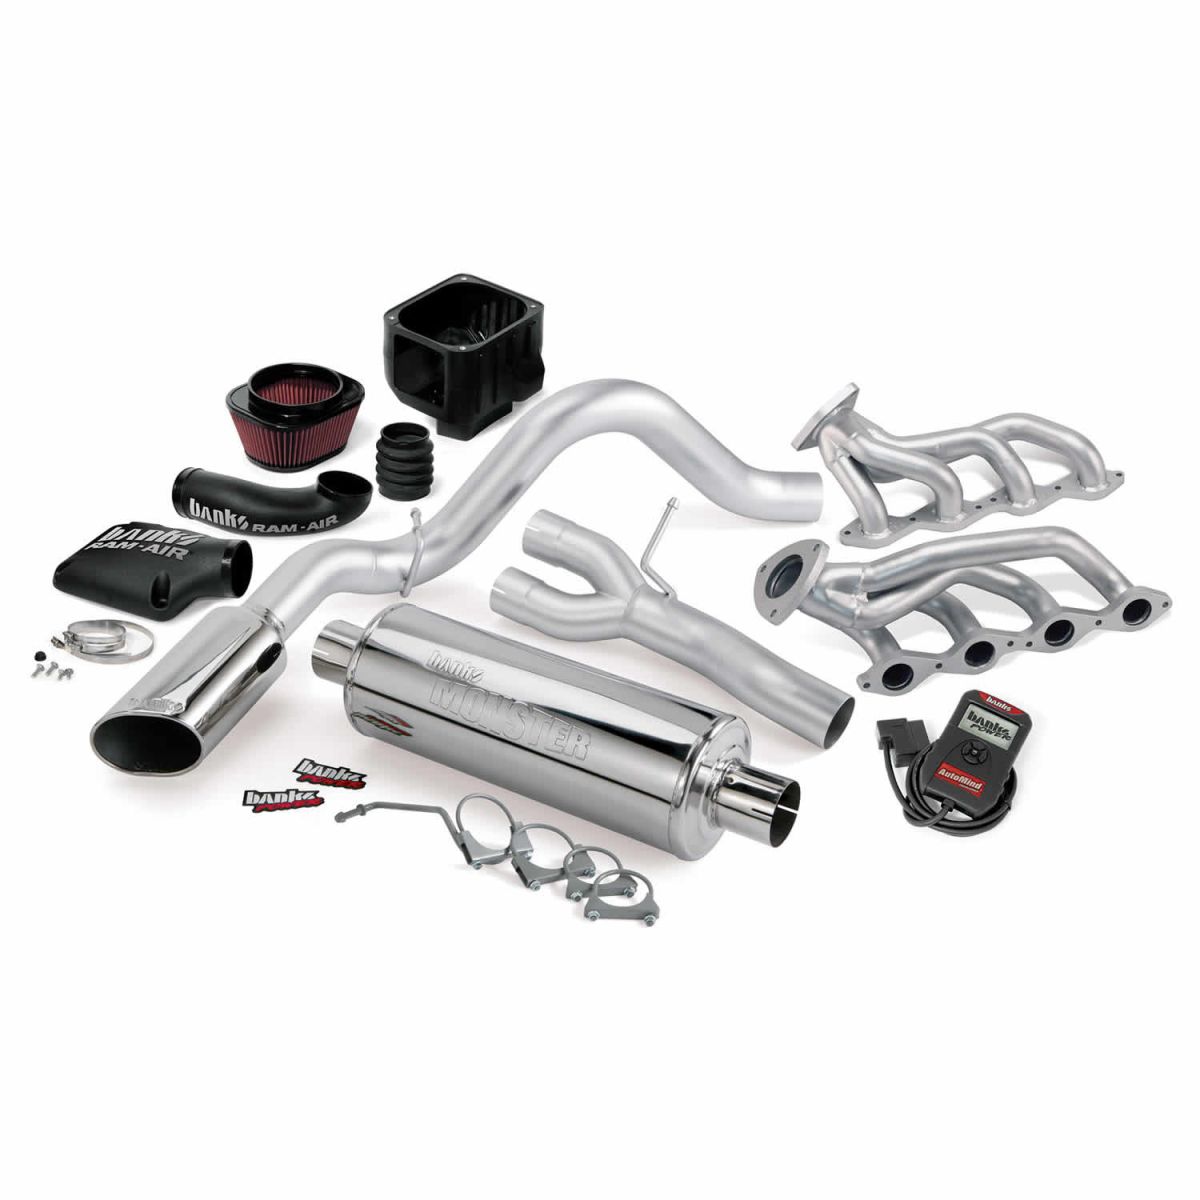 Banks Power - Banks Power PowerPack Bundle Complete Power System W/AutoMind Programmer Chrome Tailpipe 02 Chevy 4.8-5.3L 1500 ECSB